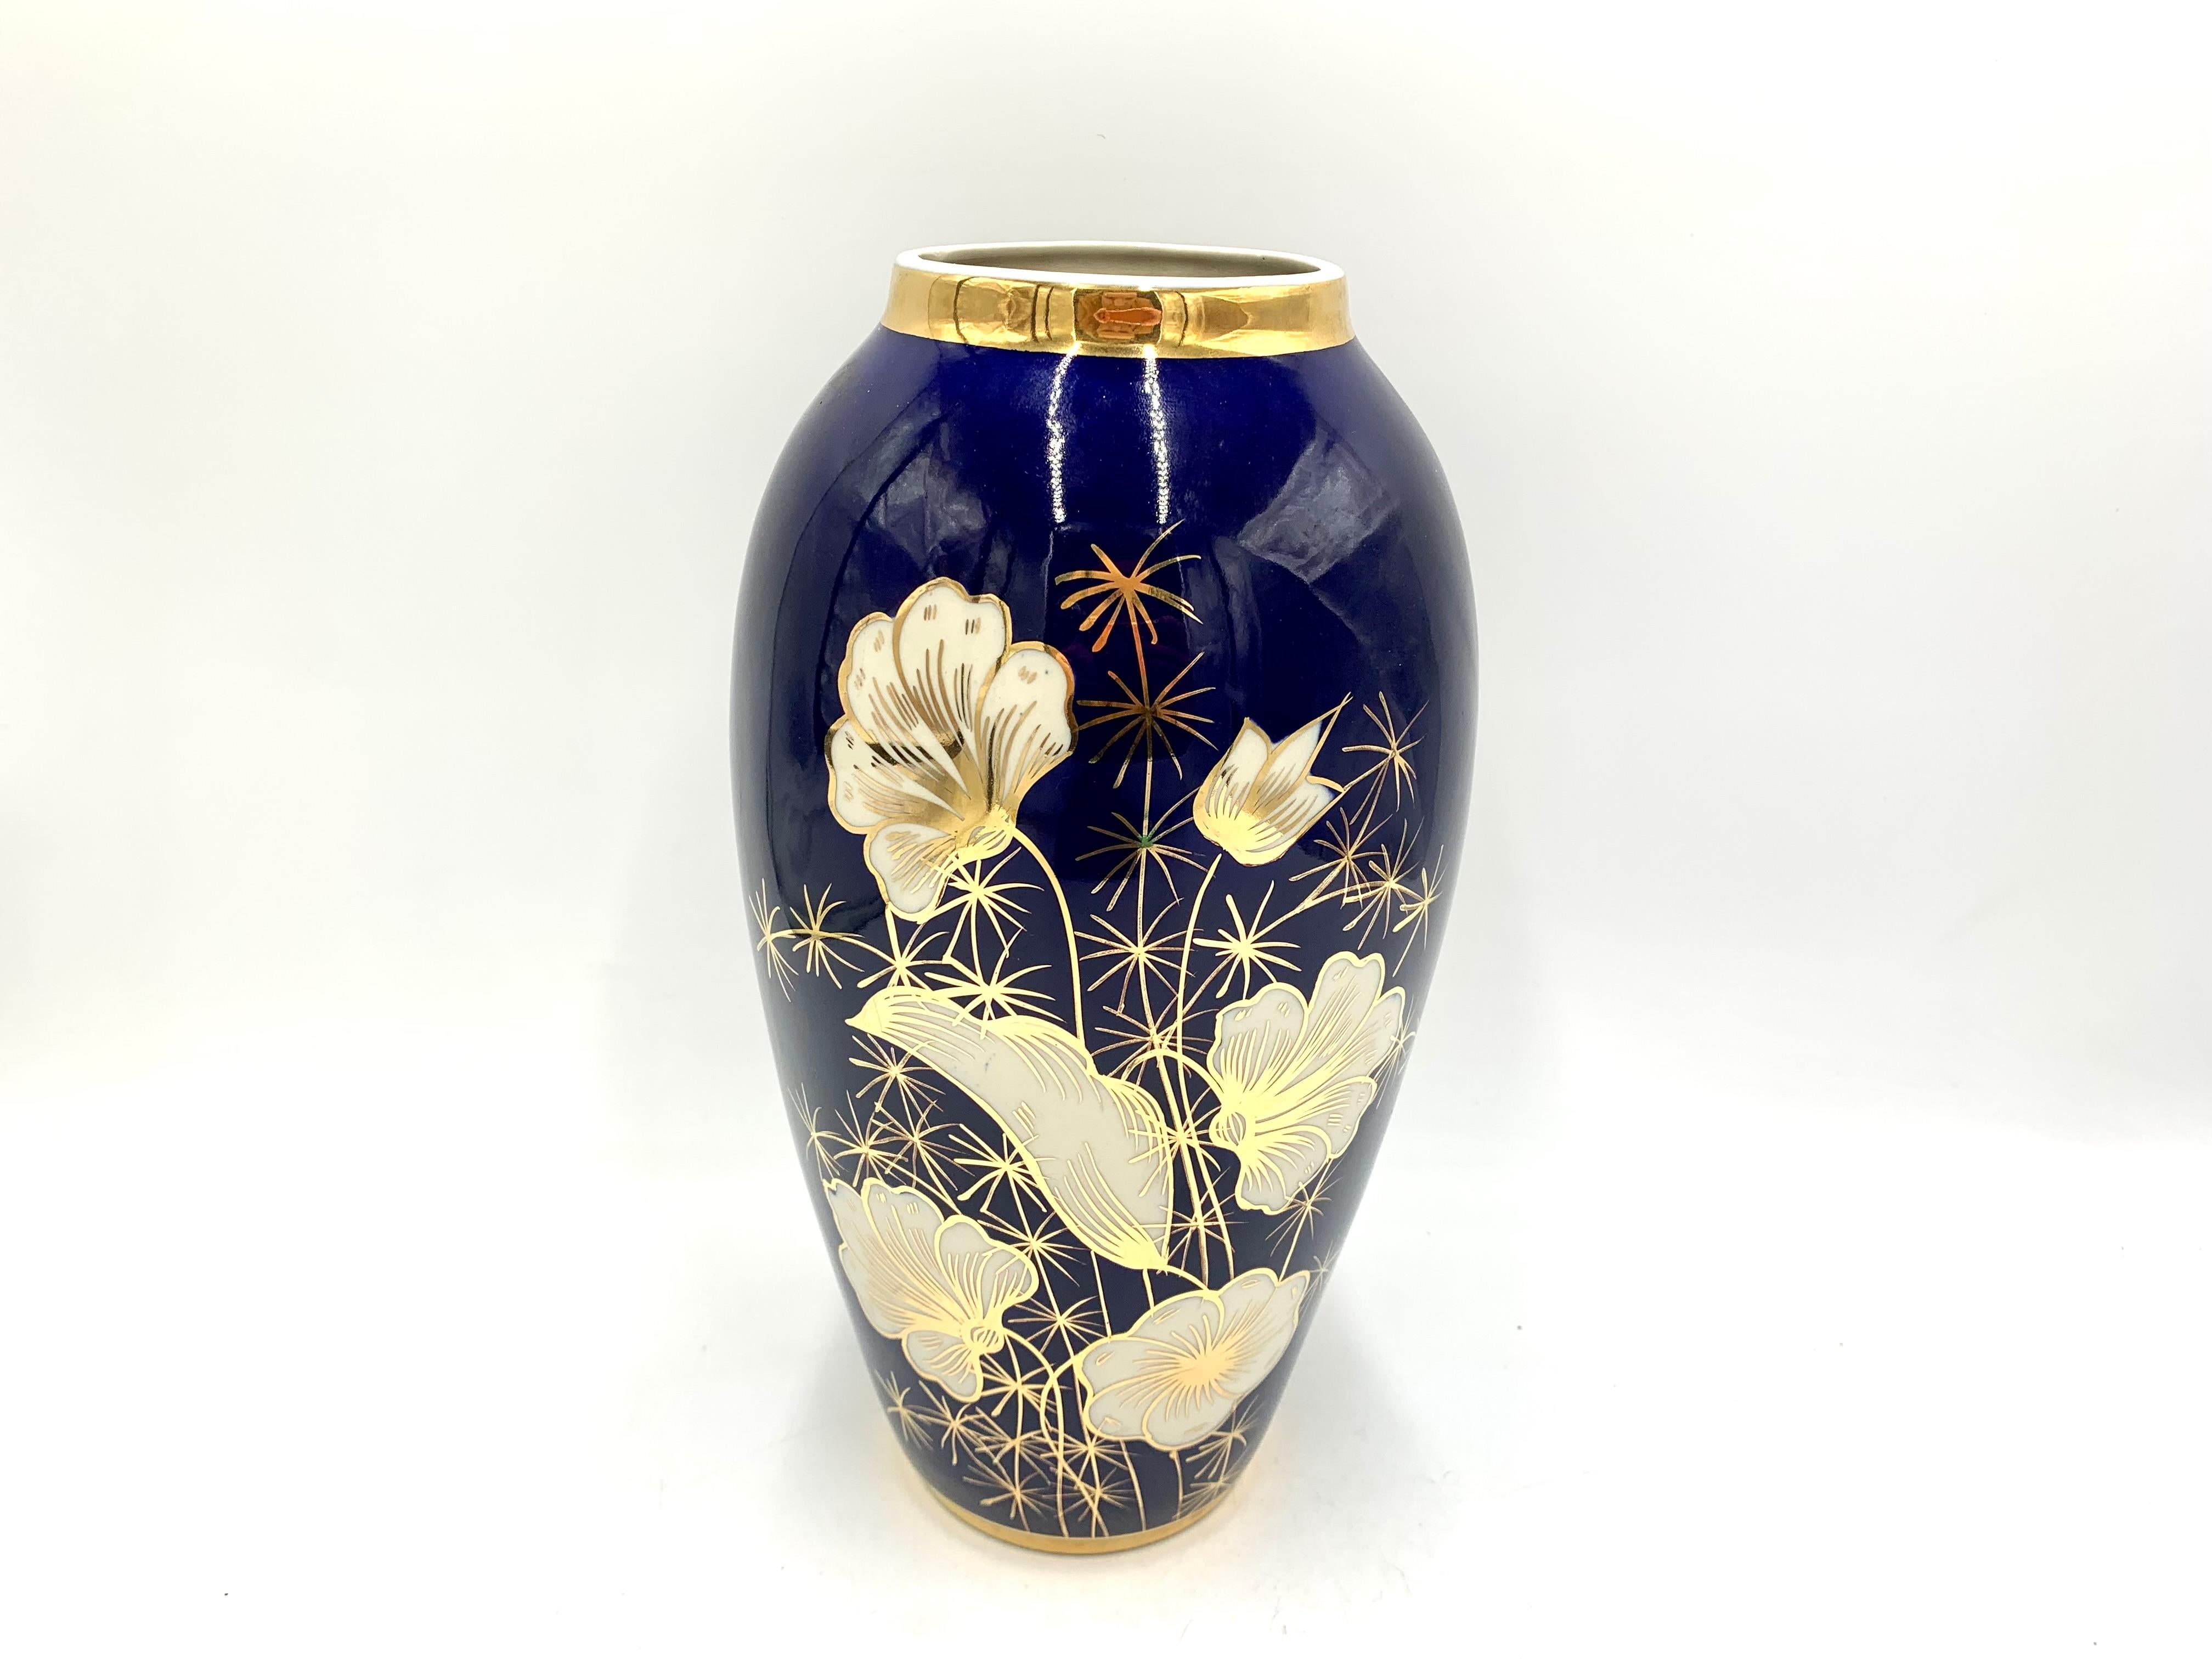 Porcelain vase with a floral motif with gilding.

Produced by Chodziez in Poland in the 1970s.

Very good condition.

Measures: height 33cm, diameter 13cm.